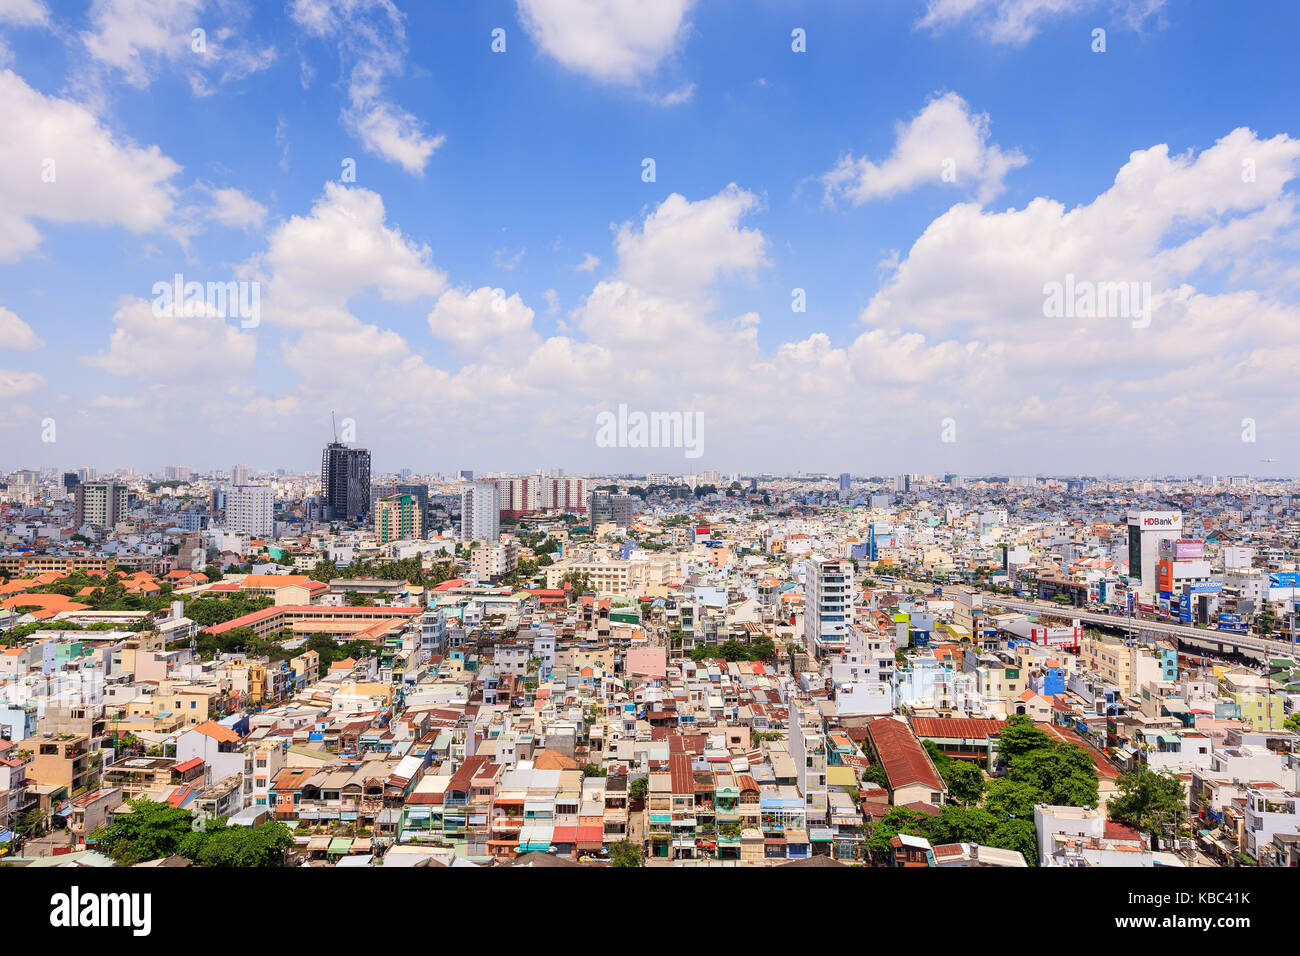 Panoramic view of Ho Chi Minh city (or Saigon), Vietnam. Ho Chi Minh city is the largest city and economic center in Vietnam Stock Photo